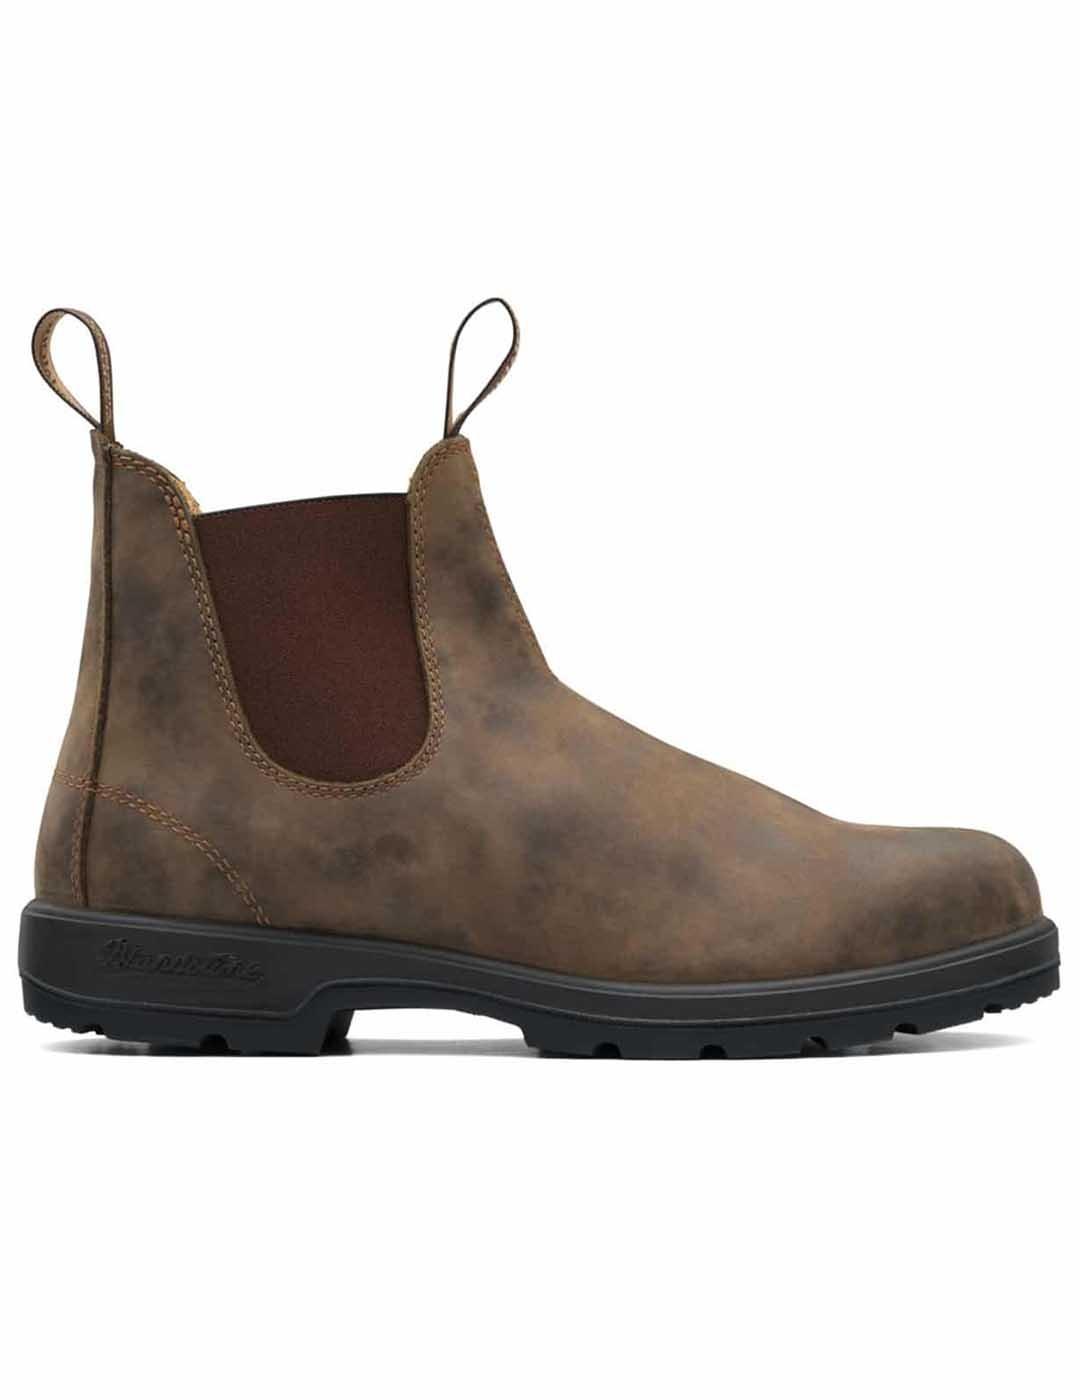 BLUNDSTONE 585 CHELSEA BOOTS RUSTIC BROWN LEATHER